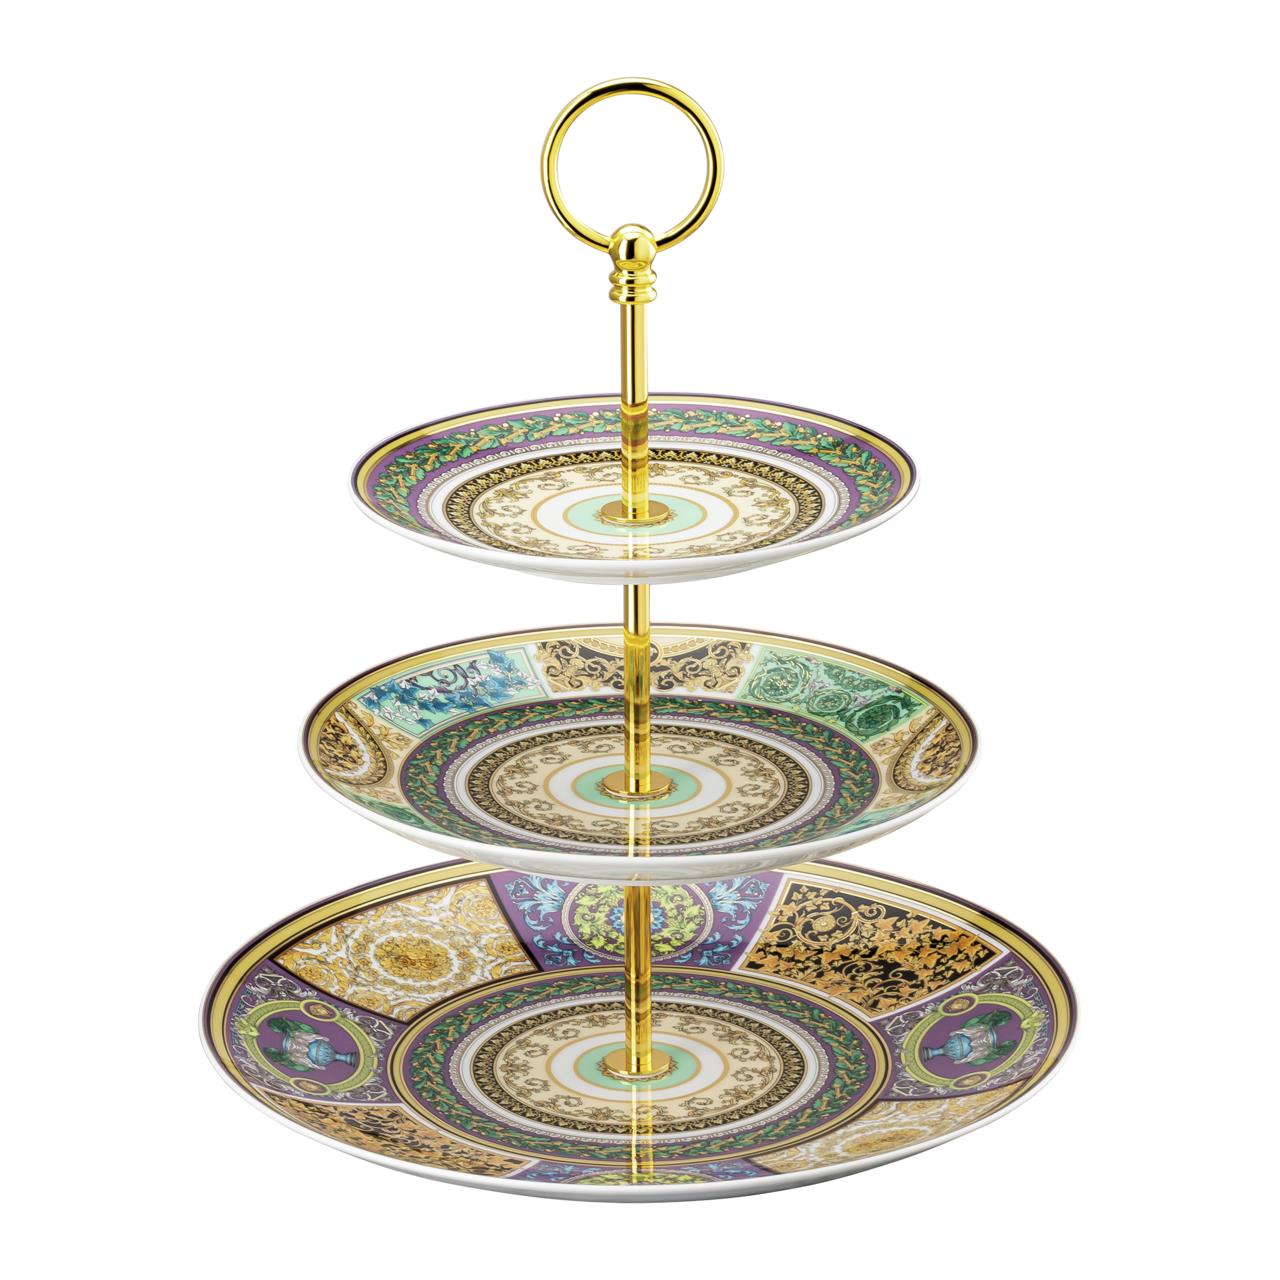 Barocco Mosaic  Stand 27,4 cm – 3 tiers  Rosenthal